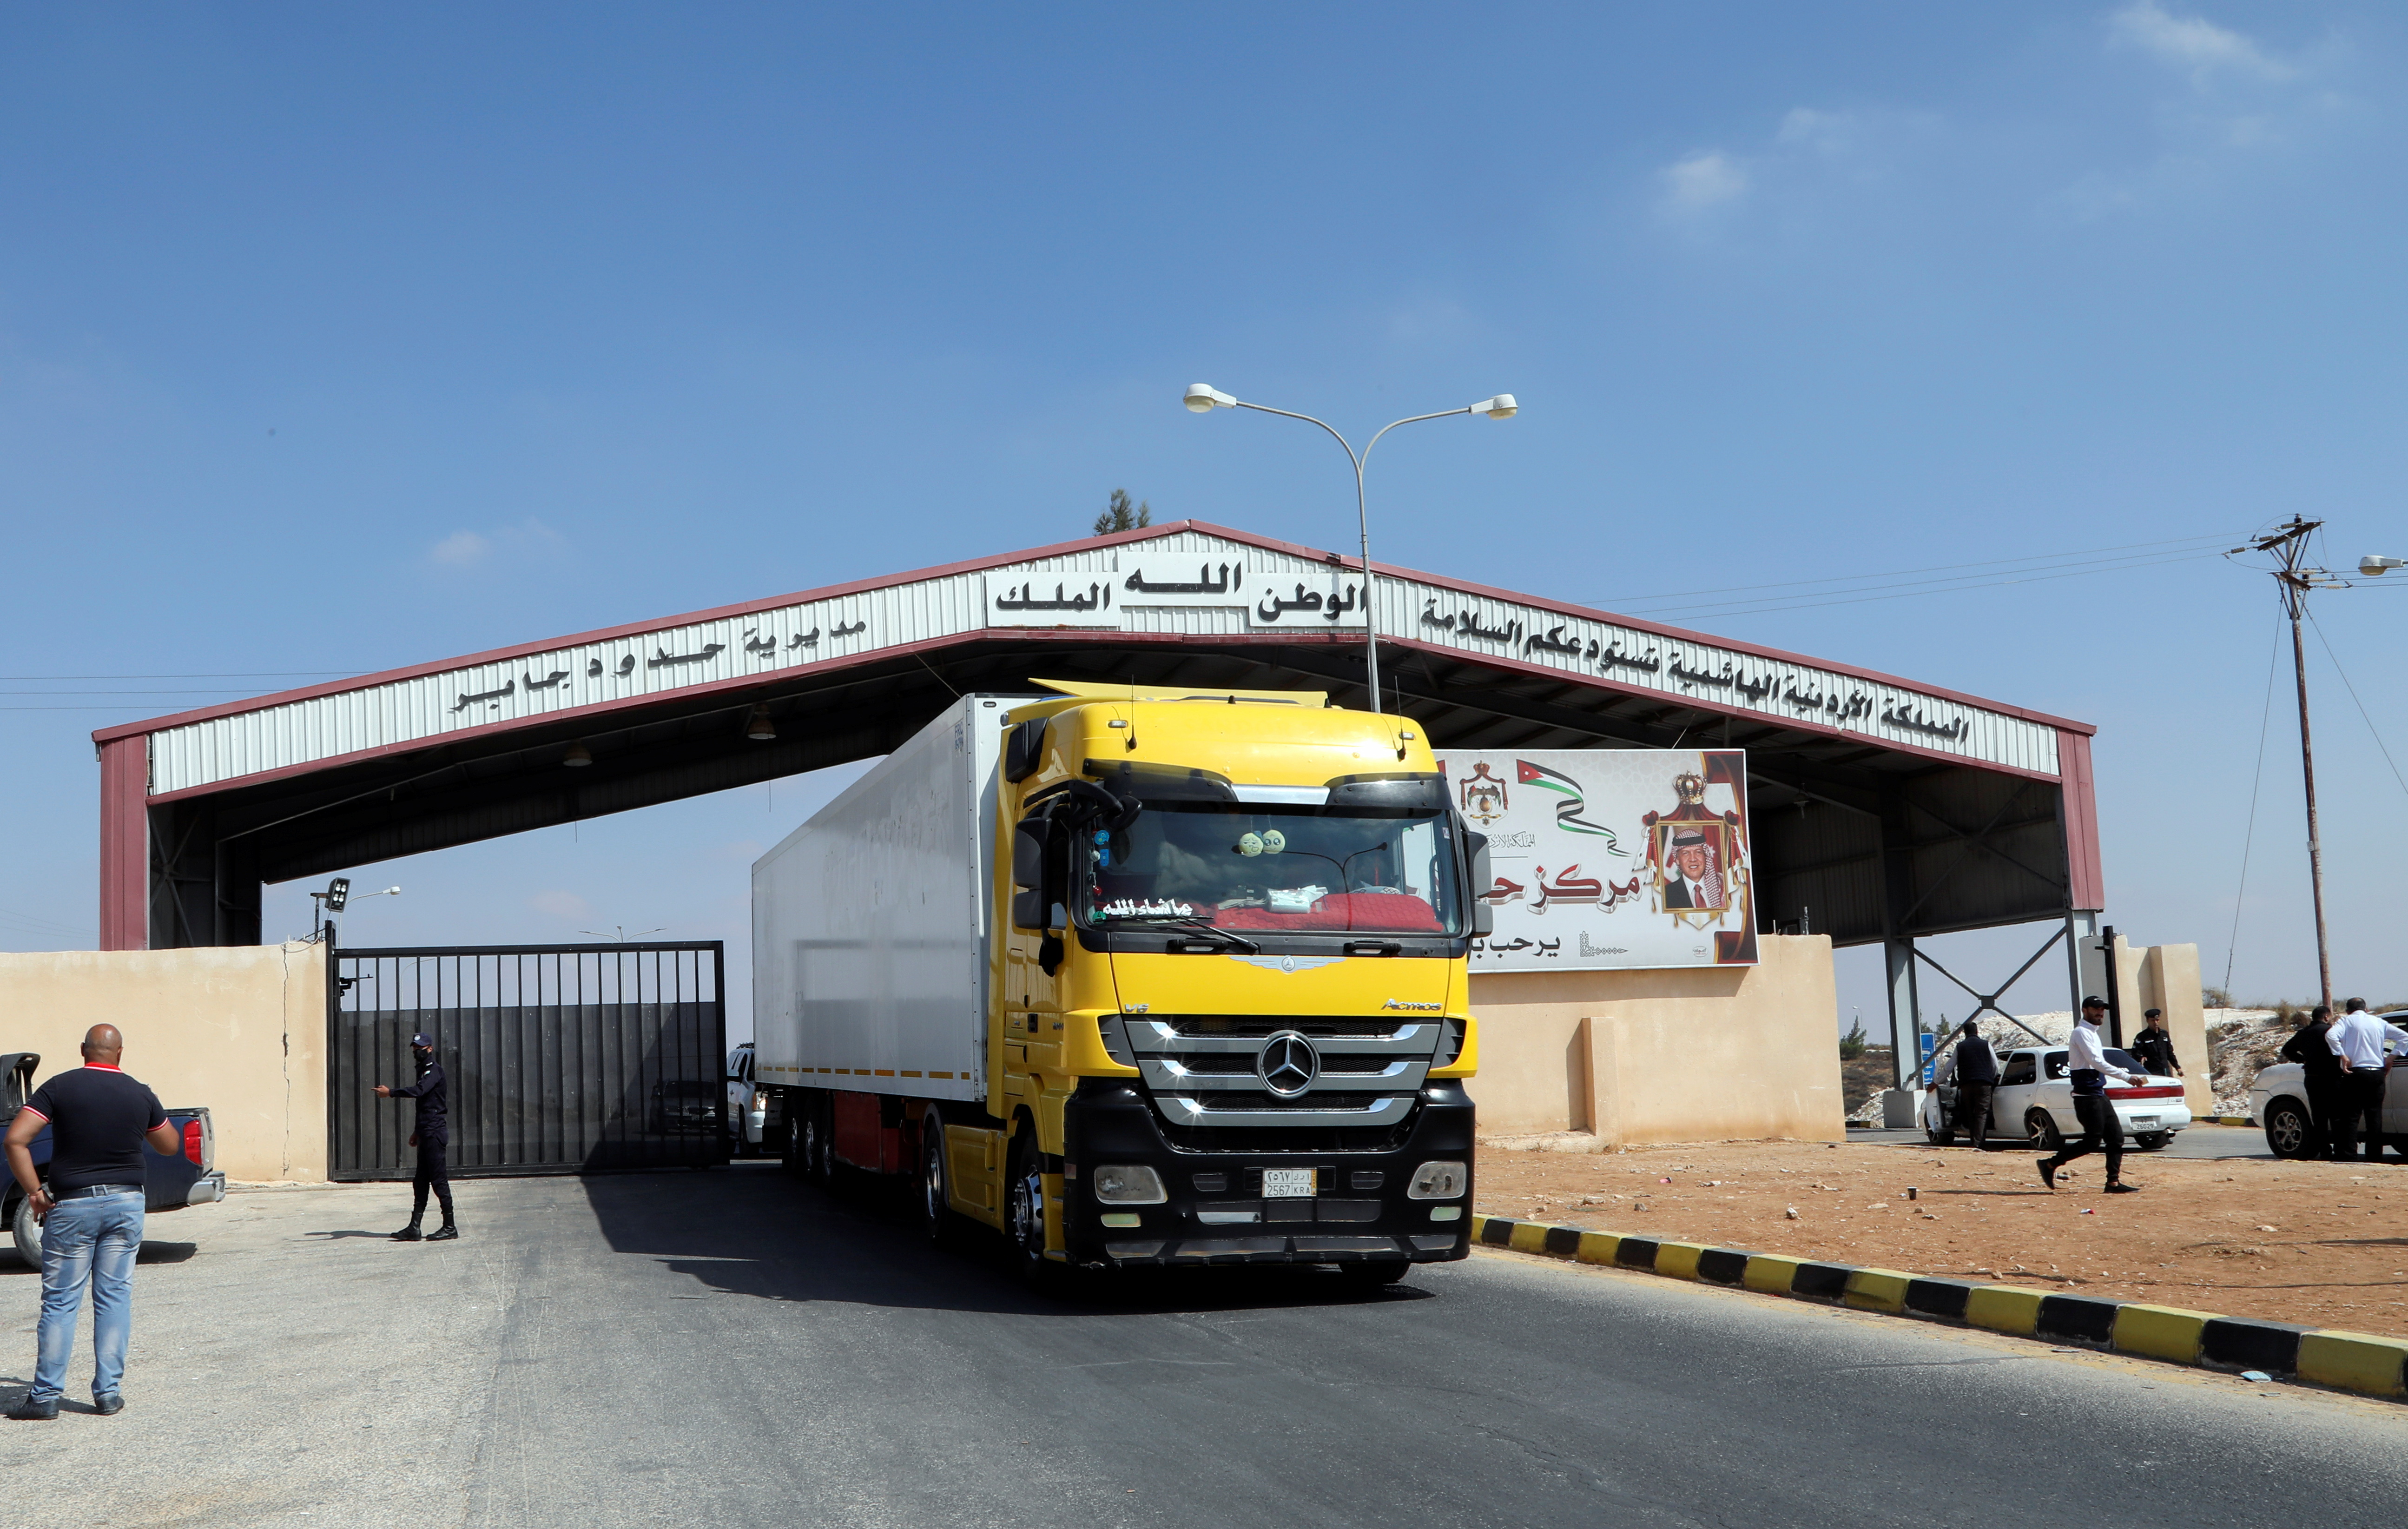 A truck drives at Jaber border crossing with Syria, near Mafraq